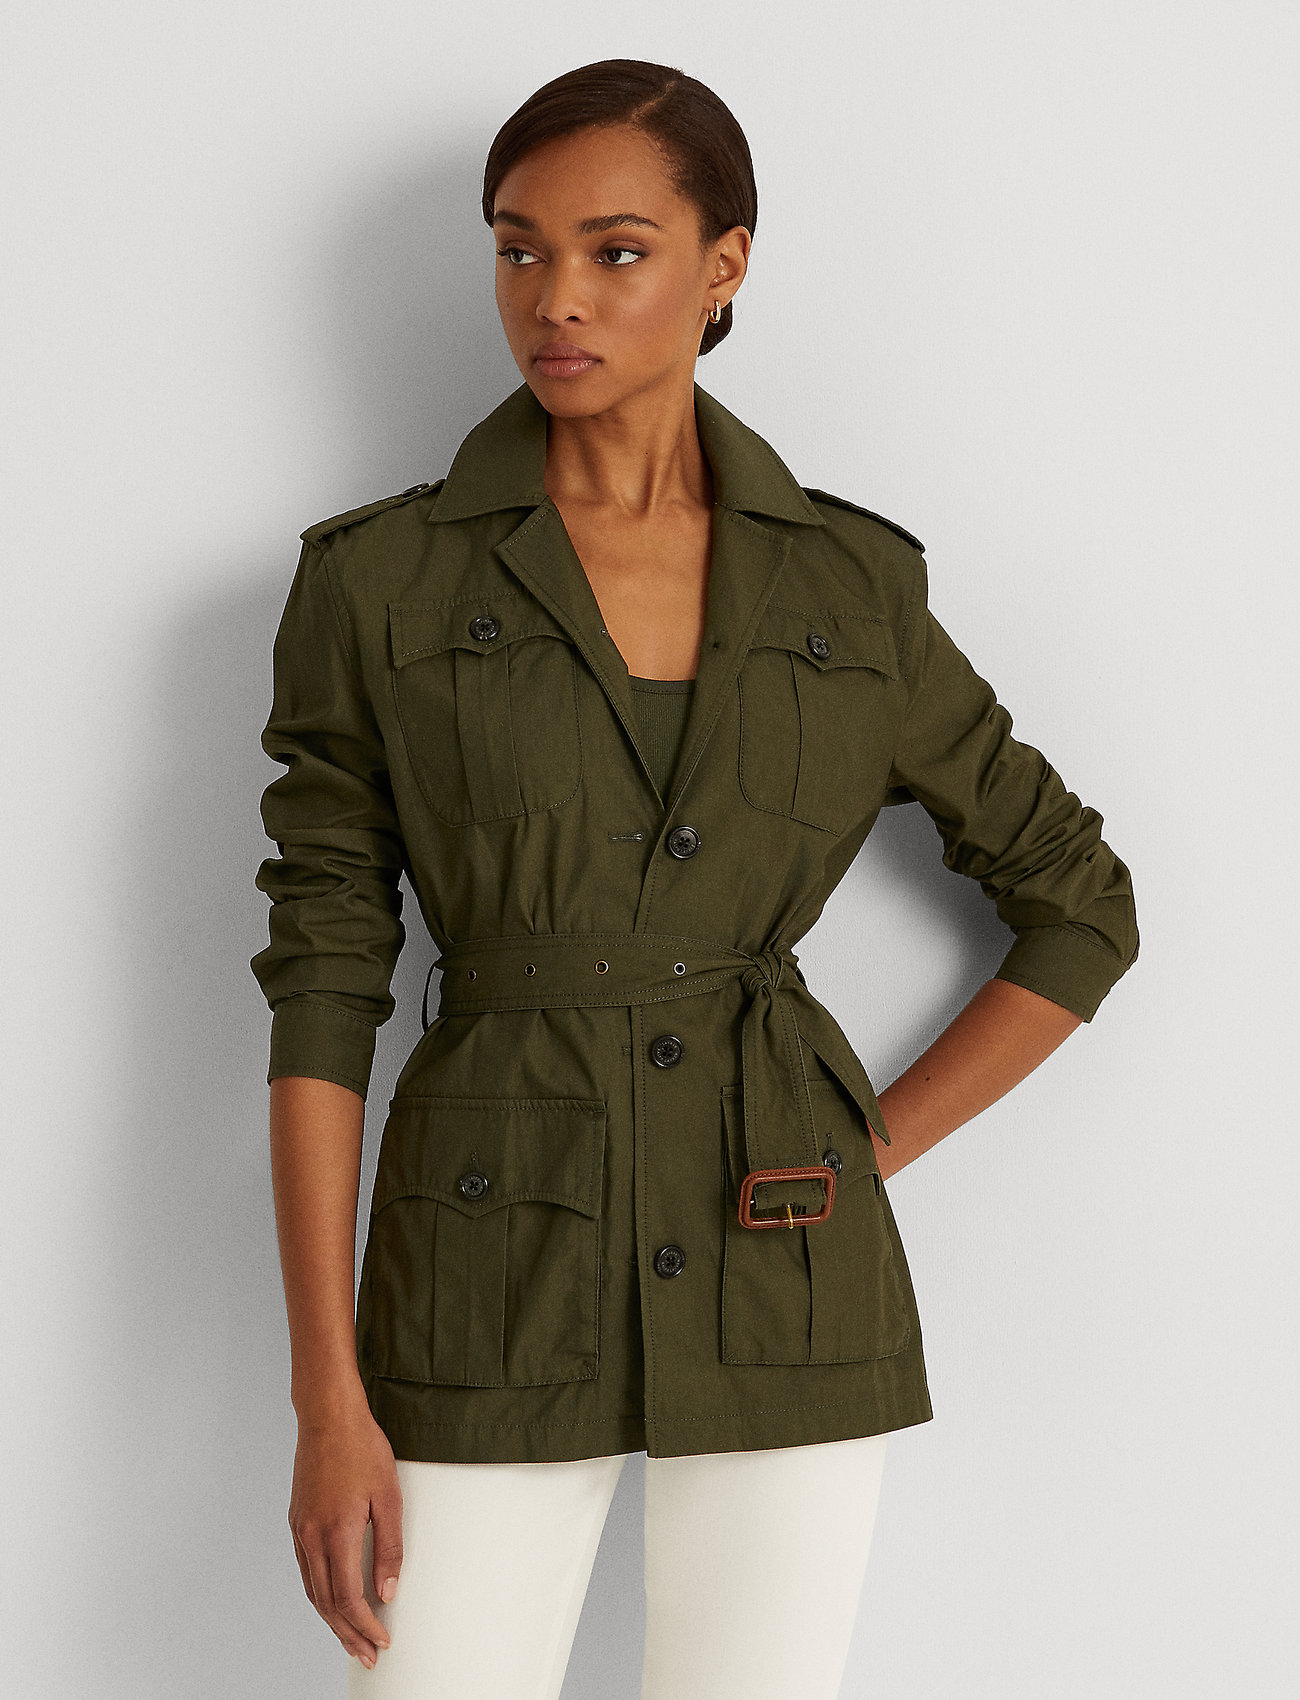 Lauren Ralph Lauren Belted Twill Field Jacket - 329 €. Buy Utility jackets  from Lauren Ralph Lauren online at . Fast delivery and easy returns